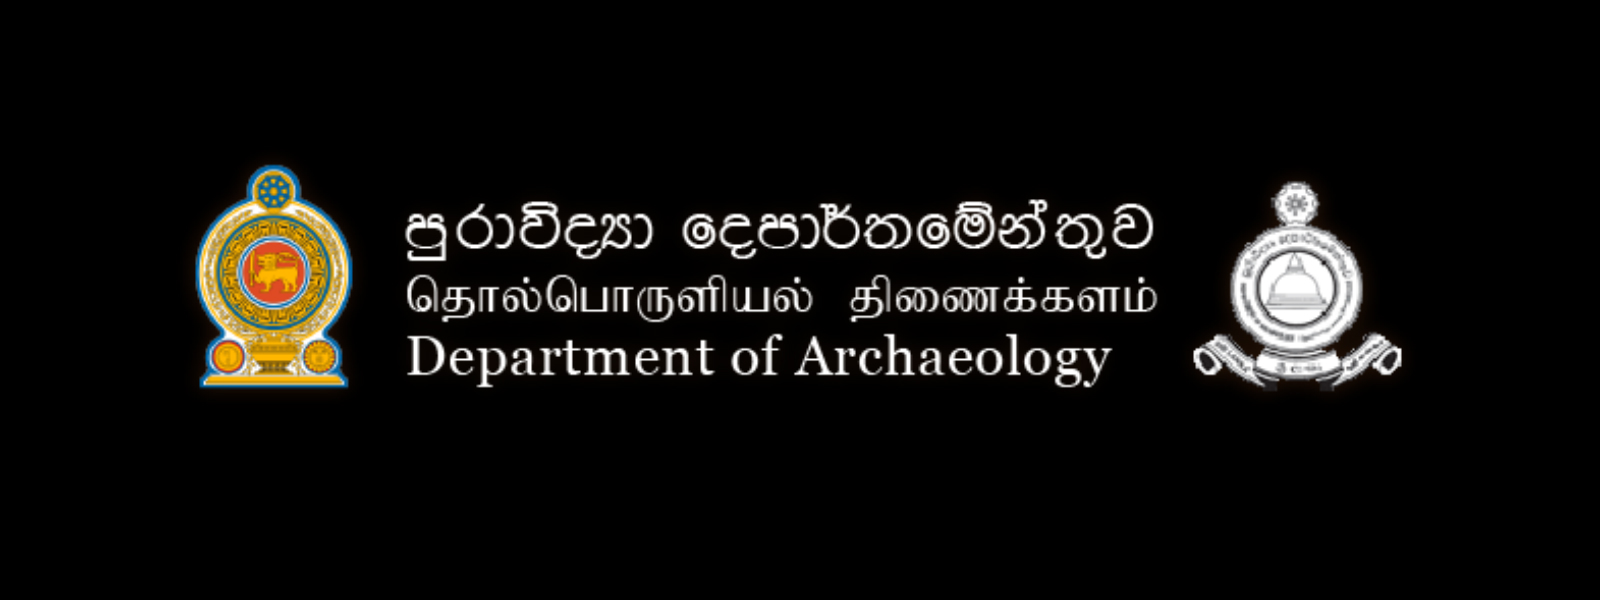 Stone age artifacts discovered in Rajagala